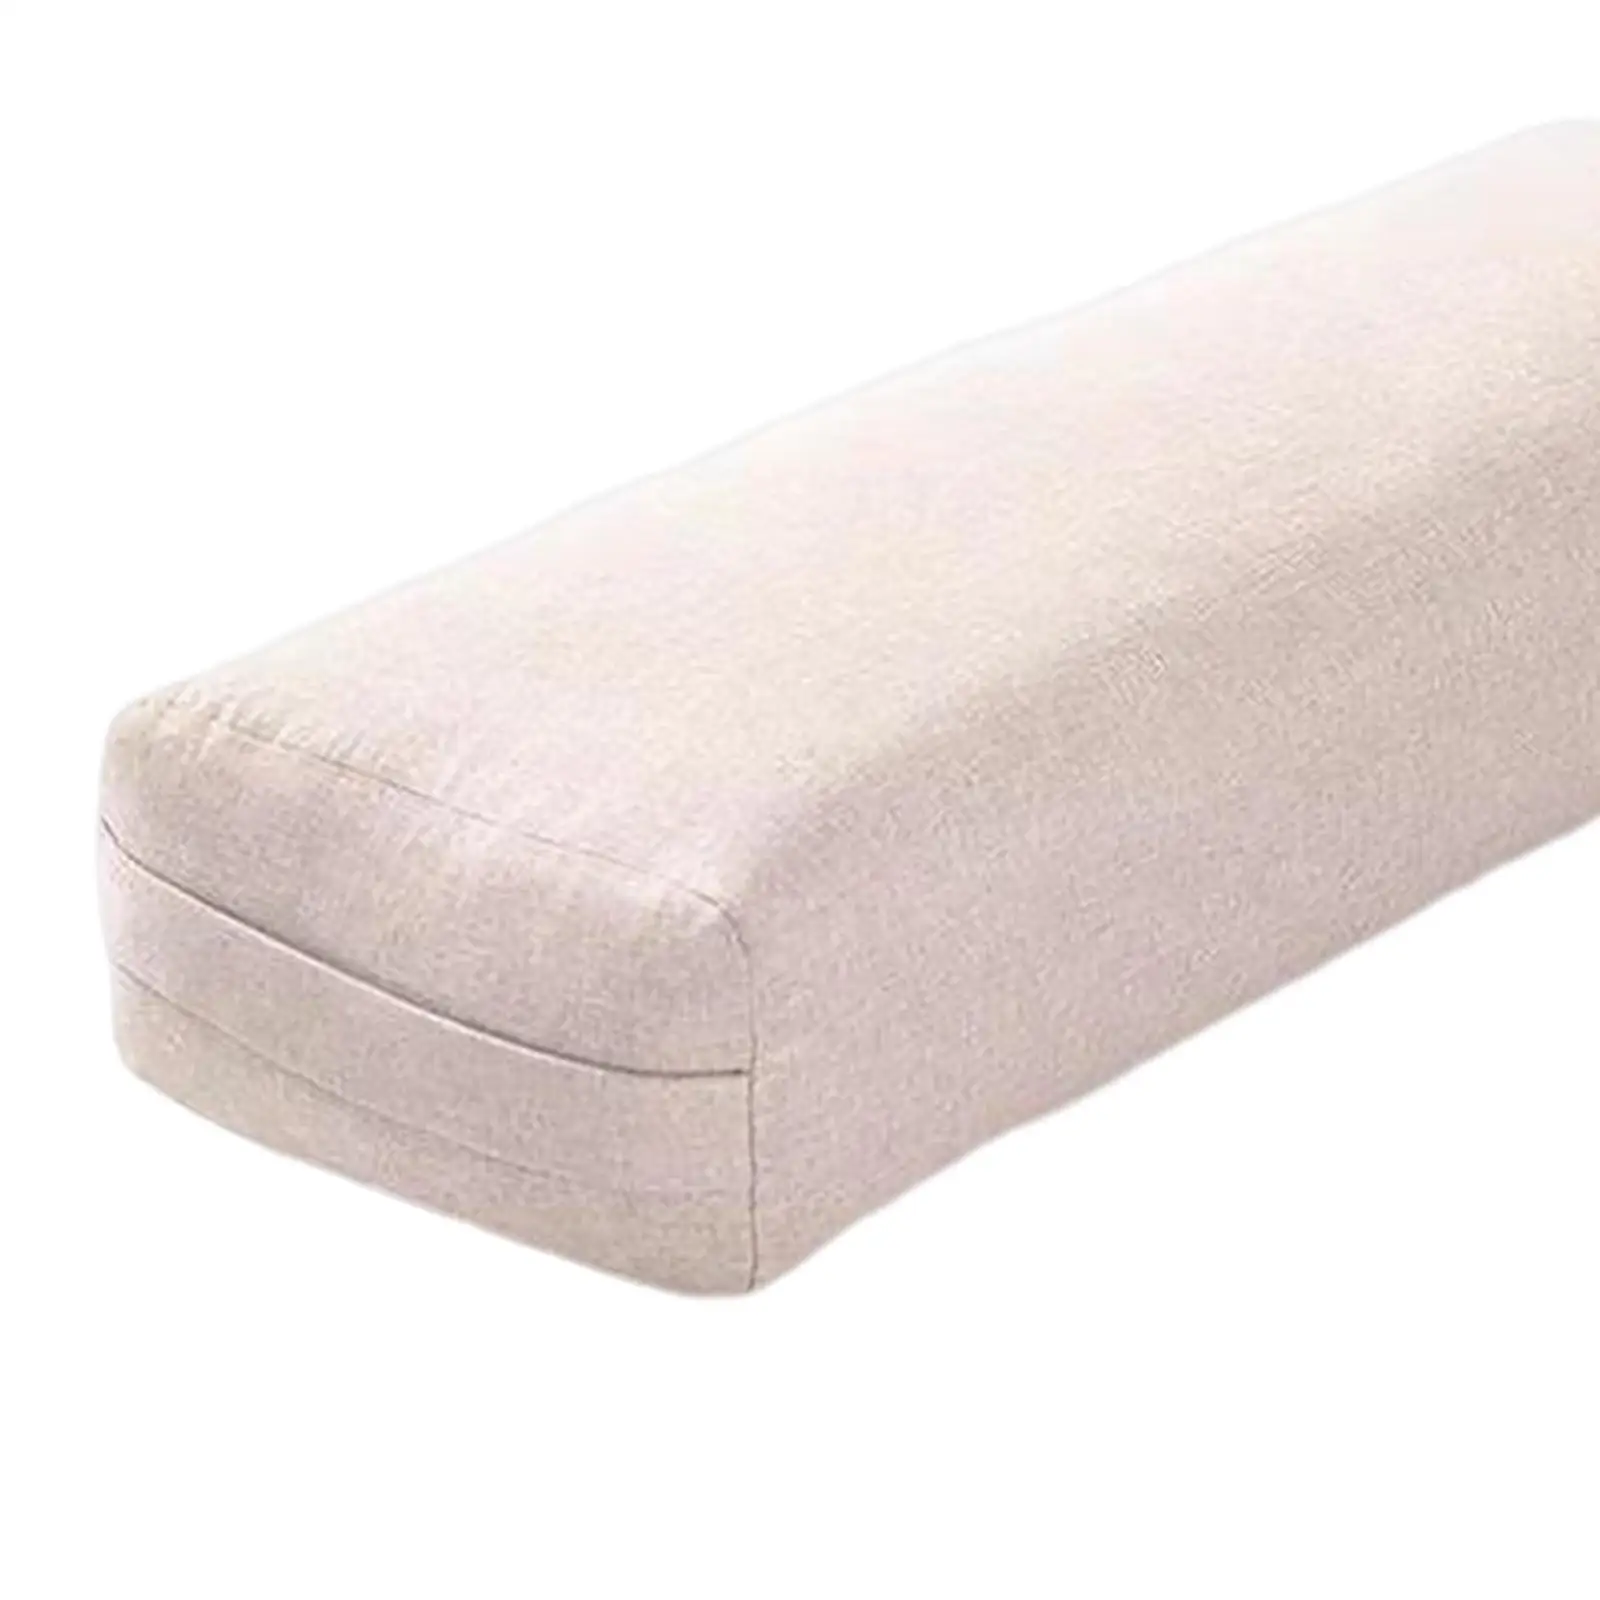 

Professional Yoga Bolster with Carry Handle Pillow for Legs Restorative Yoga Beige